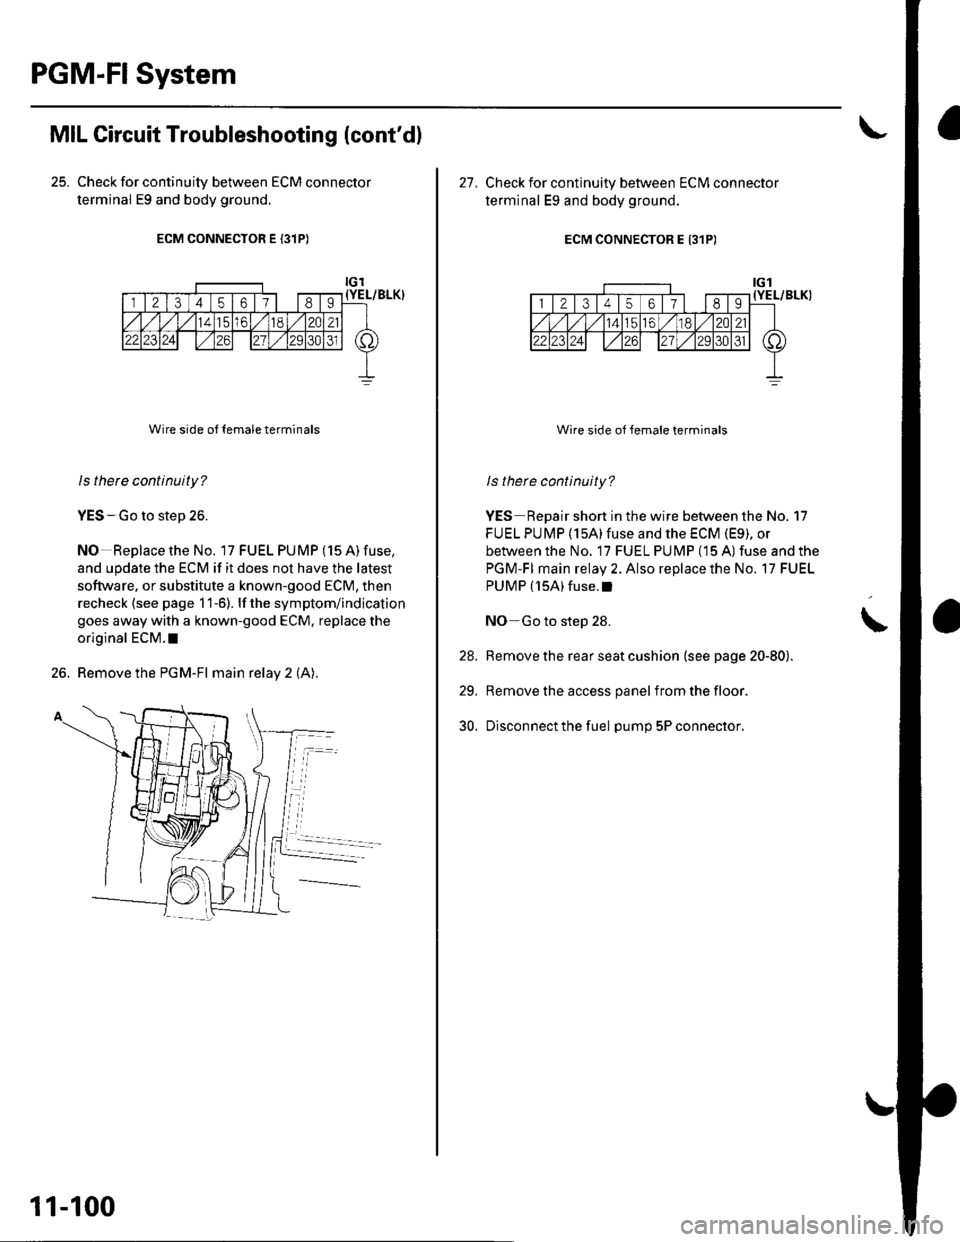 HONDA CIVIC 2003 7.G Owners Manual PGM-FI System
25.
MIL Circuit Troubleshooting (contdl
Check for continuity between ECM connector
terminal E9 and body ground.
ECM CONNECTOR E (31P)
Wire side o{ {emale terminals
ls therc continuity?
